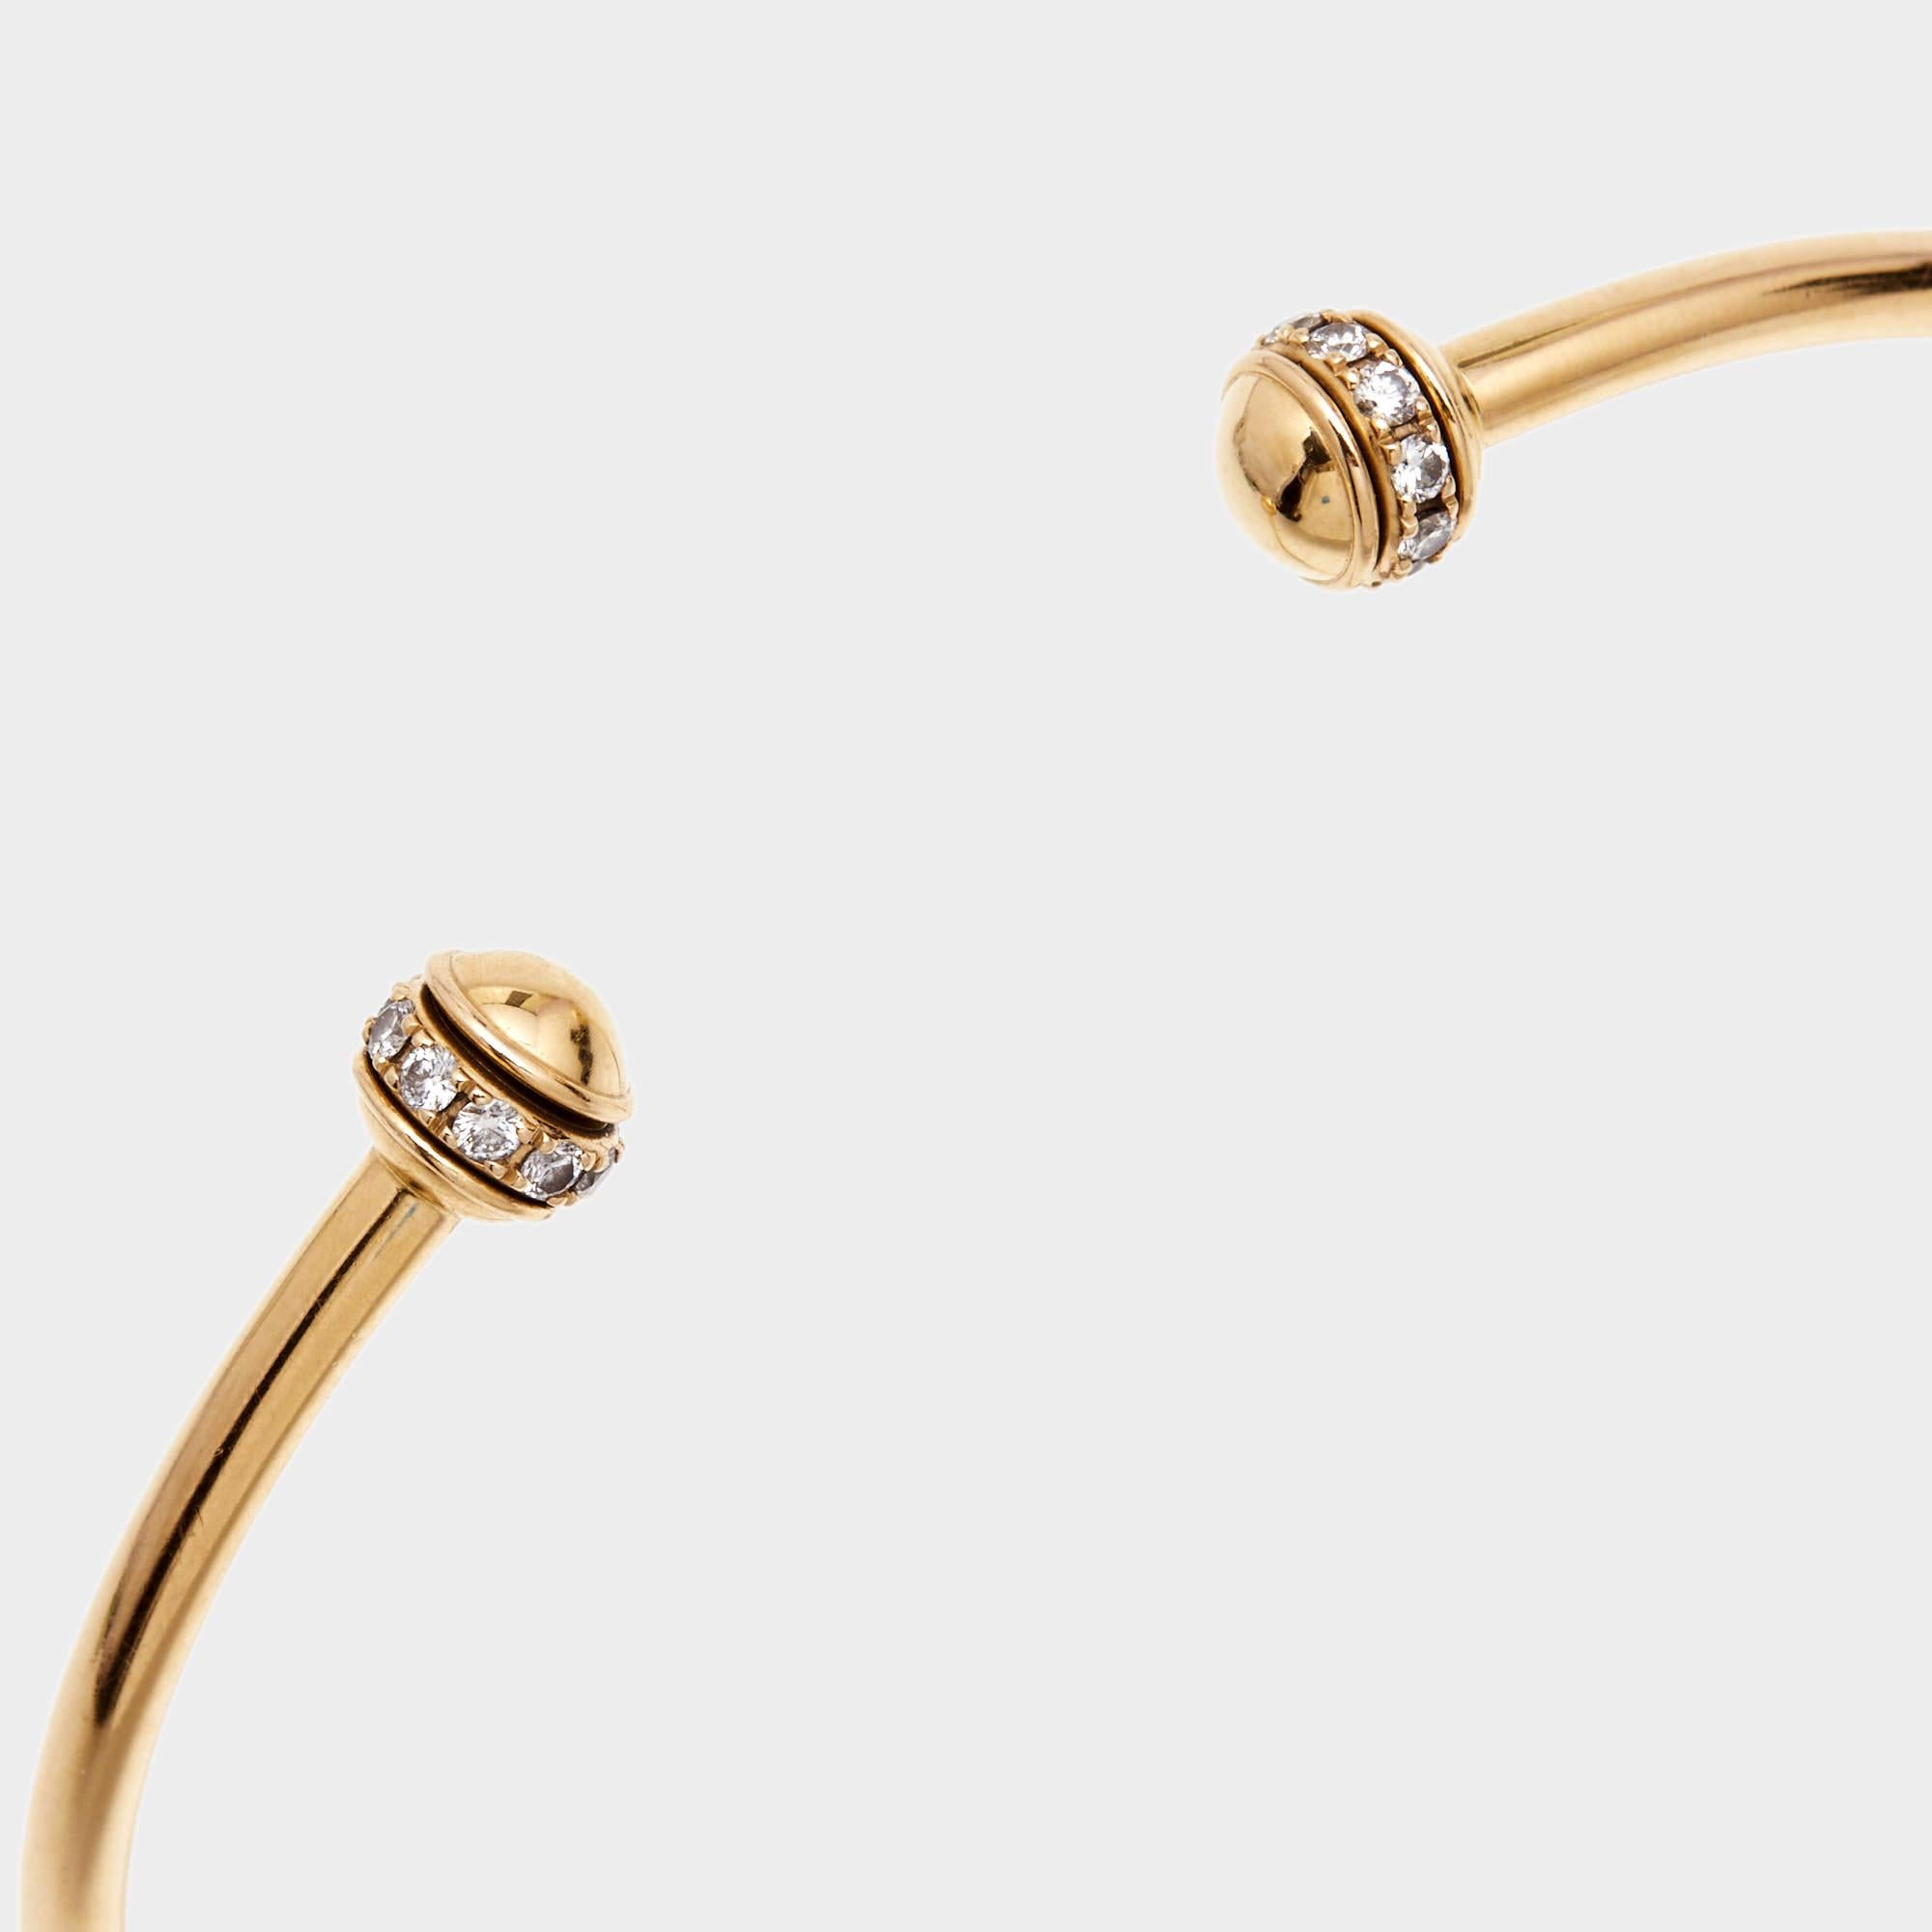 Show your love for fine artistry and luxury accessories with this stunning open-cuff bracelet from Piaget that is made from 18k rose gold. One of its most popular collections from Piaget is Possession which is defined by rotating rings. The beauty